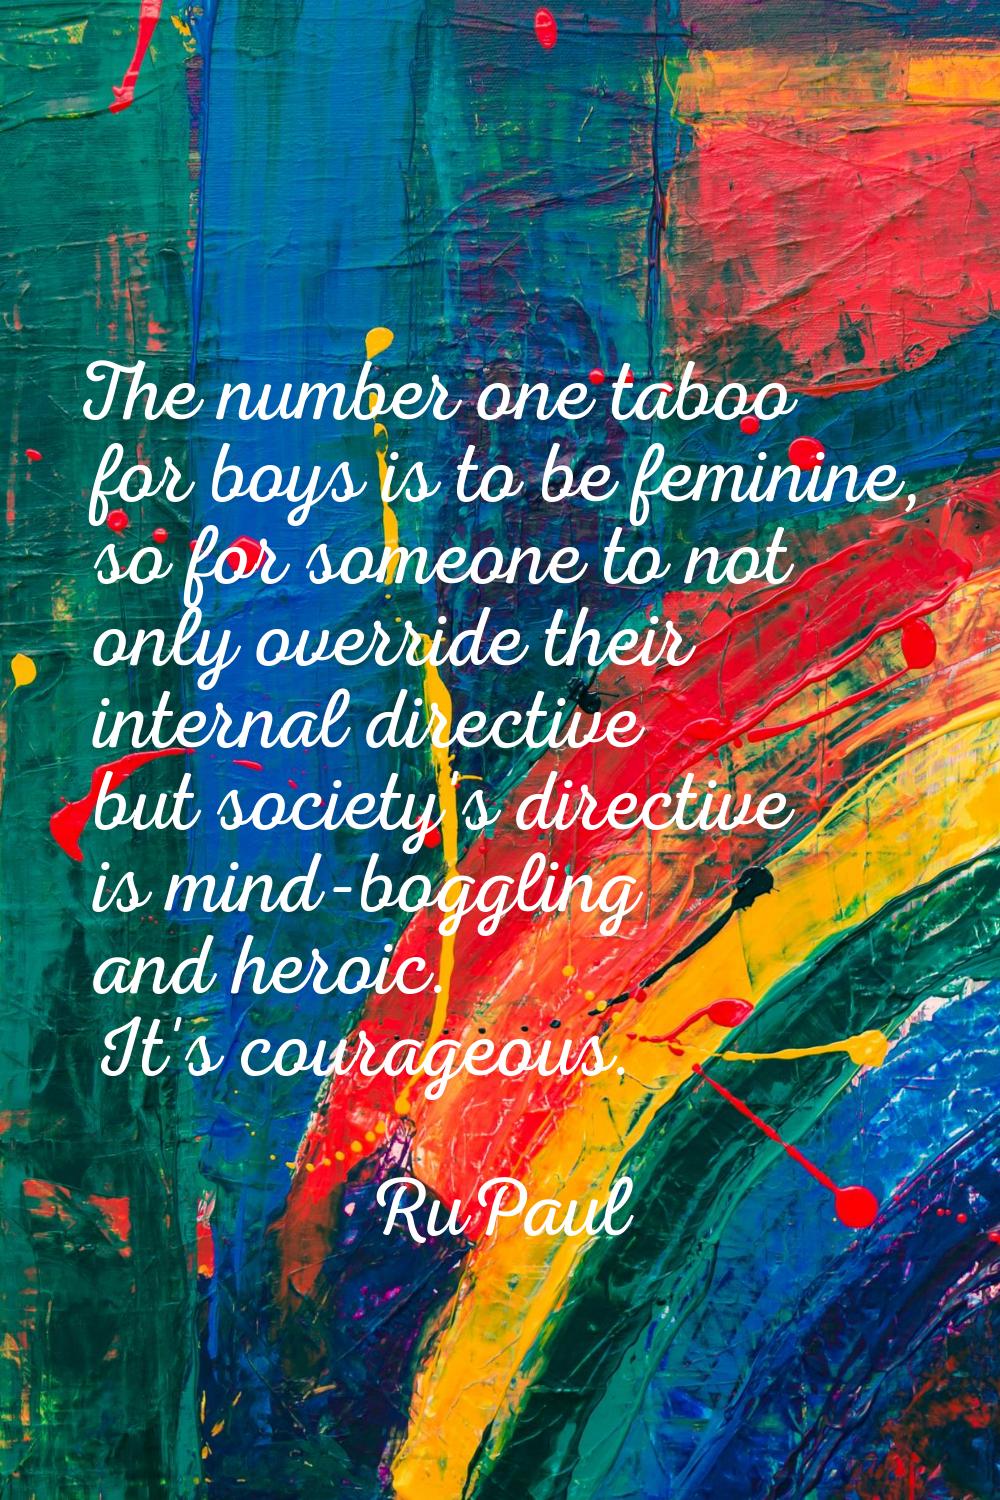 The number one taboo for boys is to be feminine, so for someone to not only override their internal